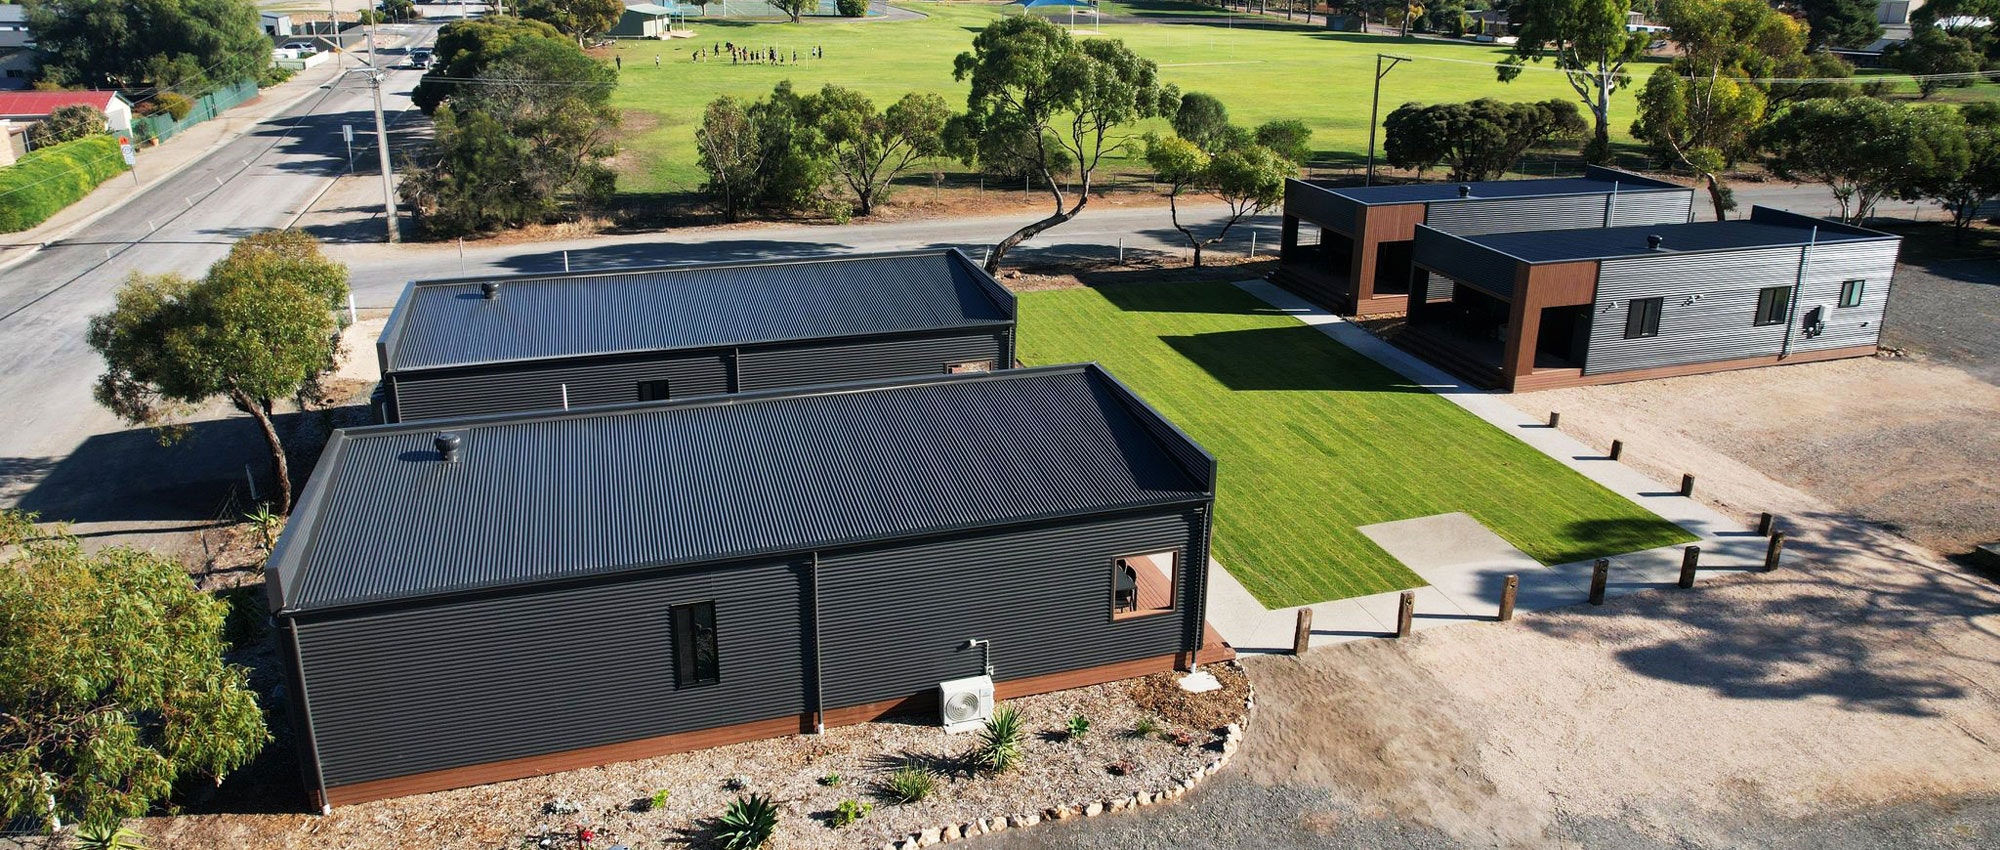 Two bedroom homes for accommodation in South Australia